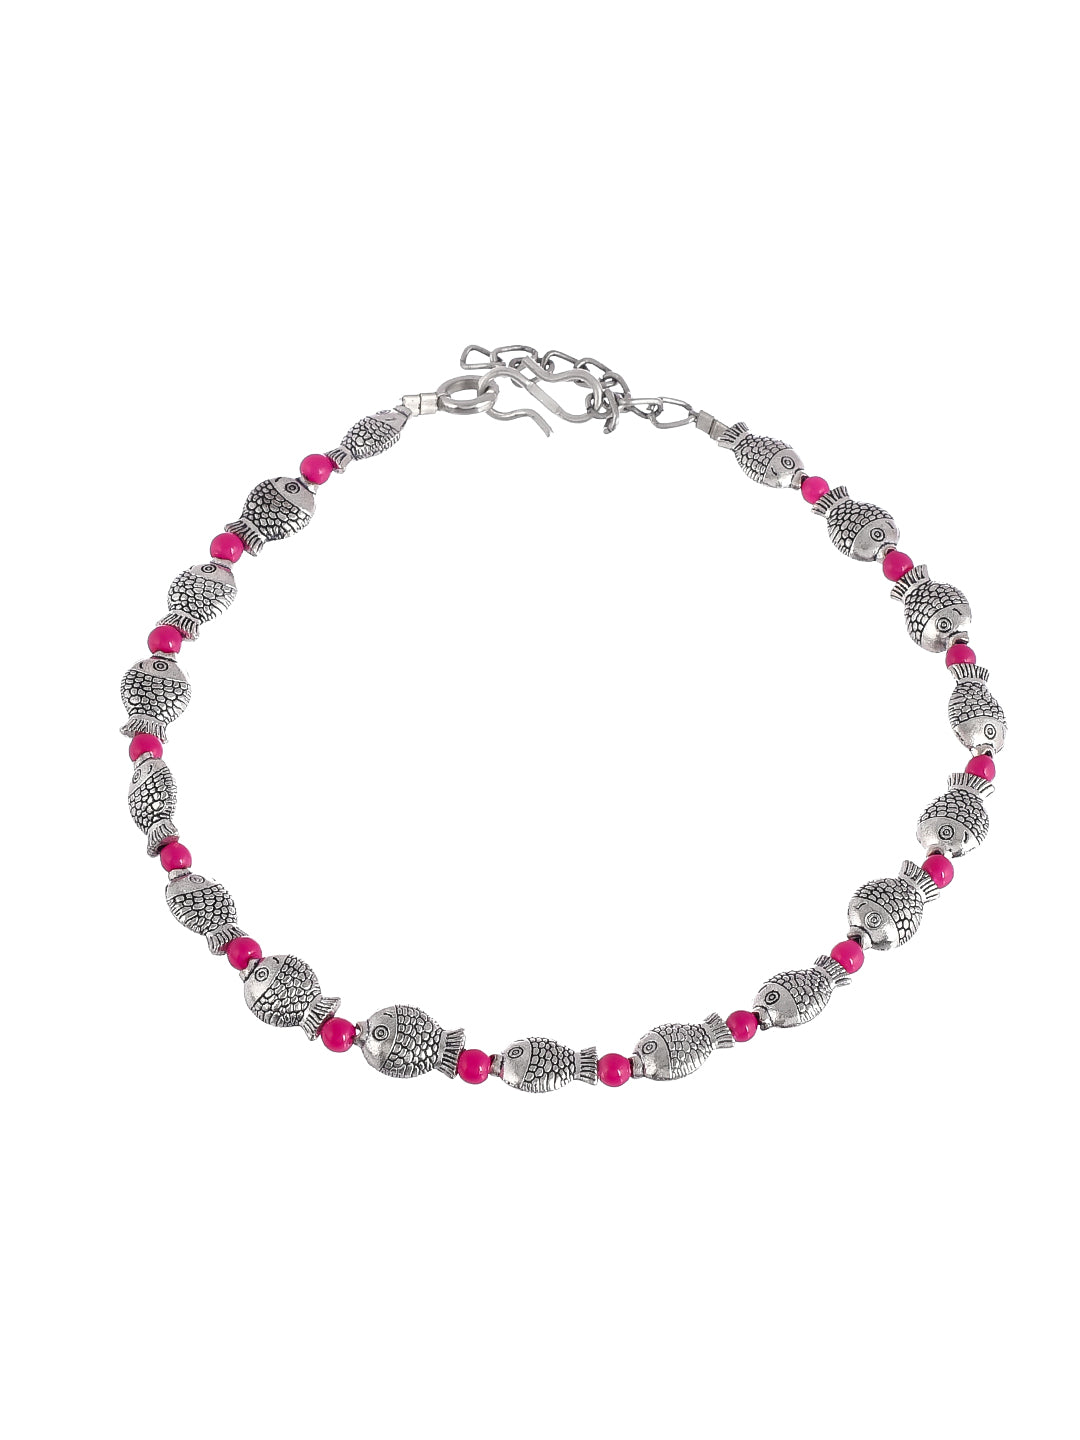 Red Beads Silver Fish Anklets